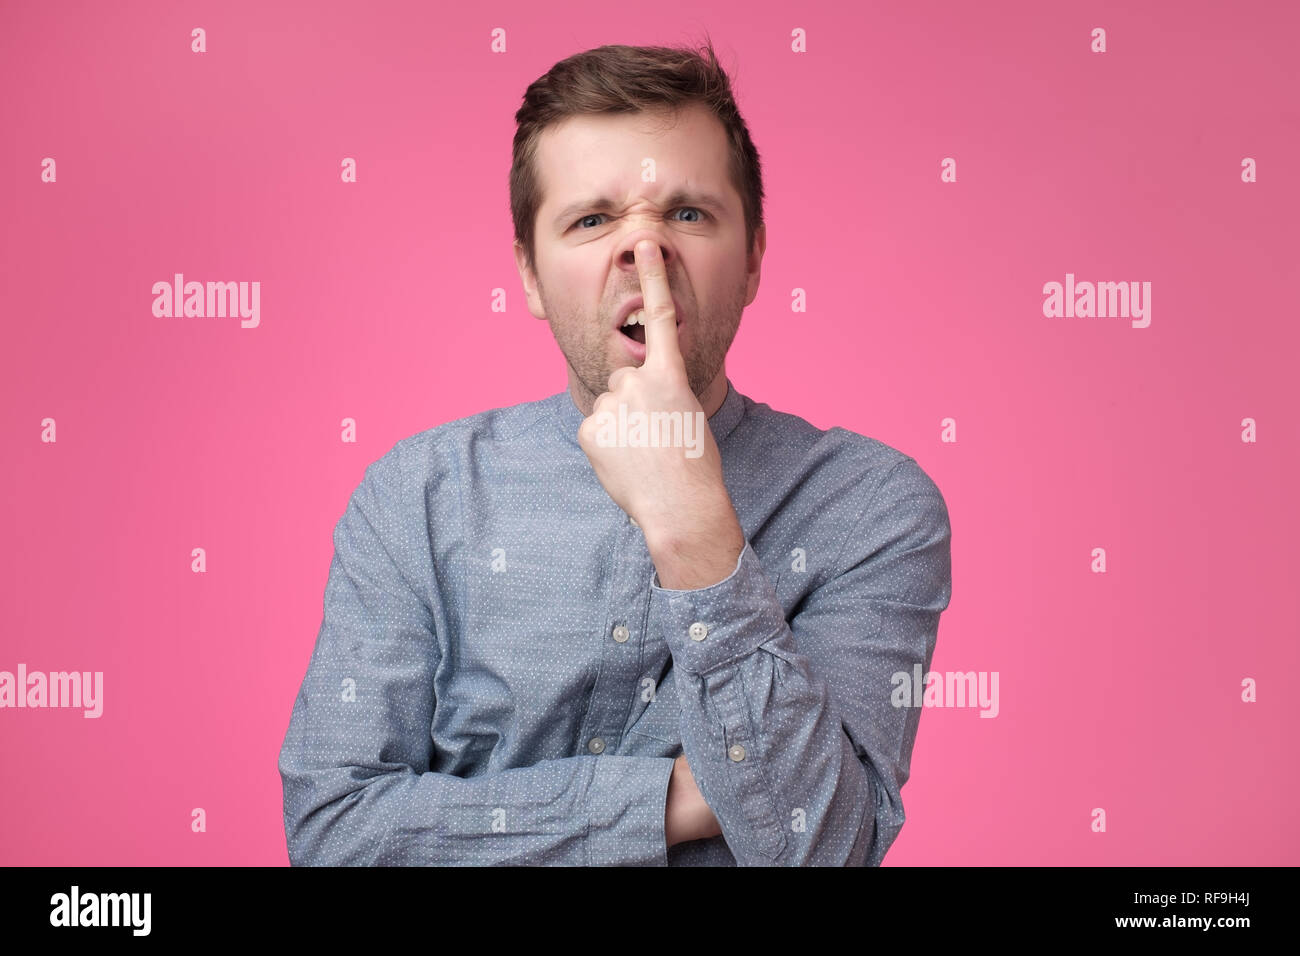 Man turns his nose up like pig. Stock Photo